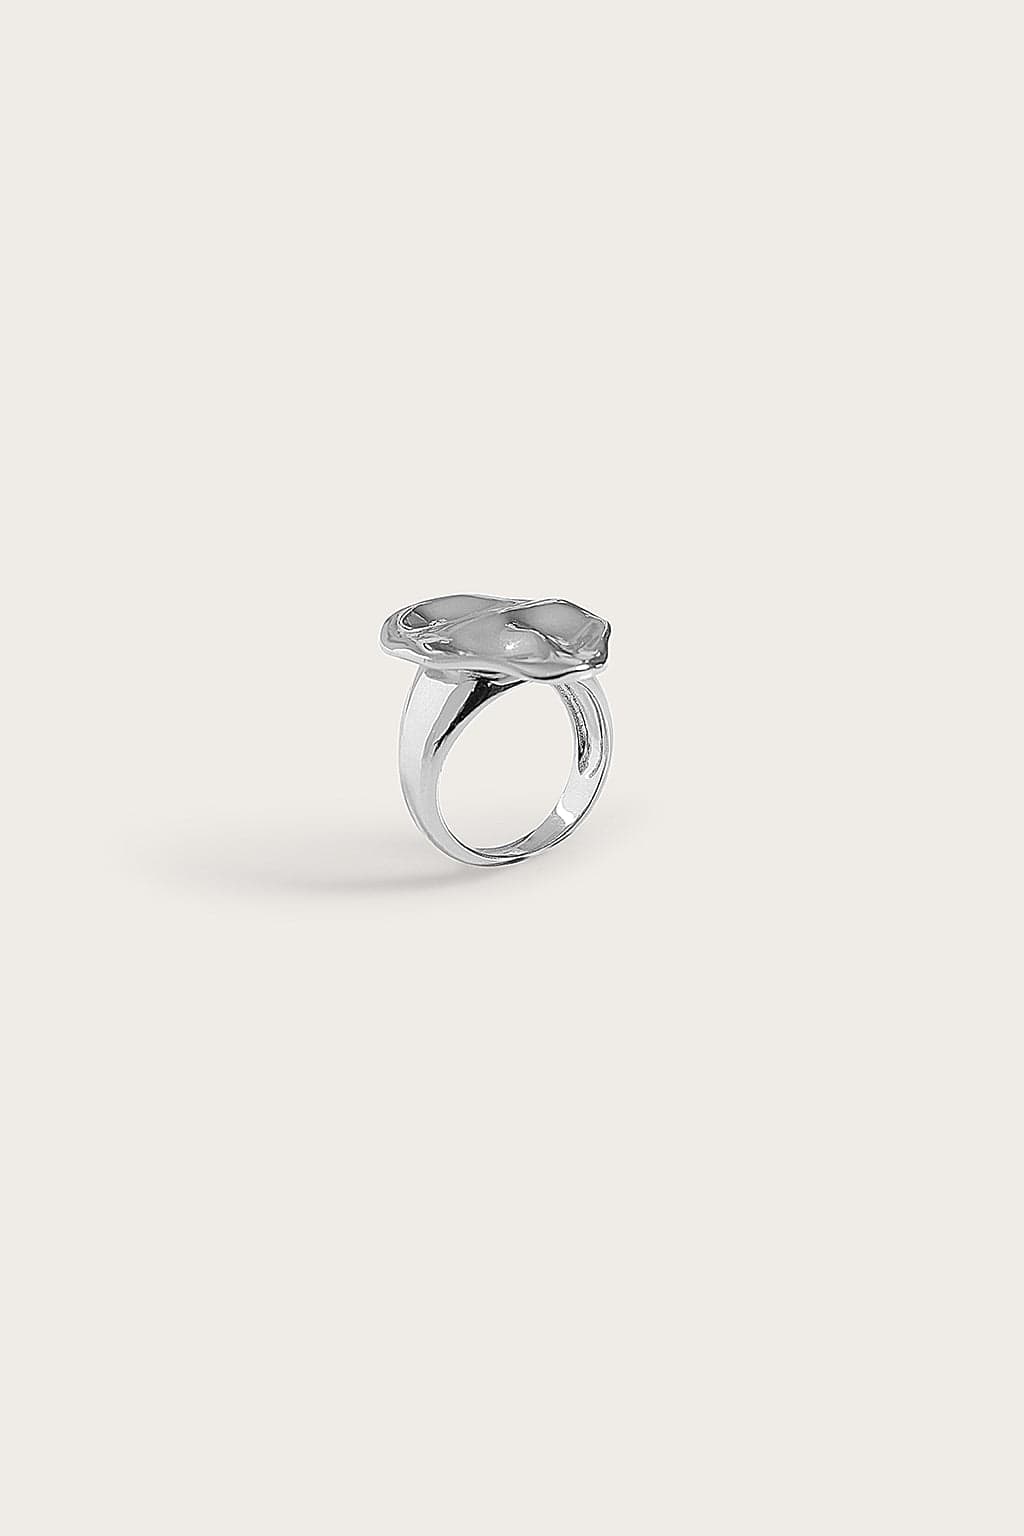 LEORA Hammered Effect Oval Silver Ring